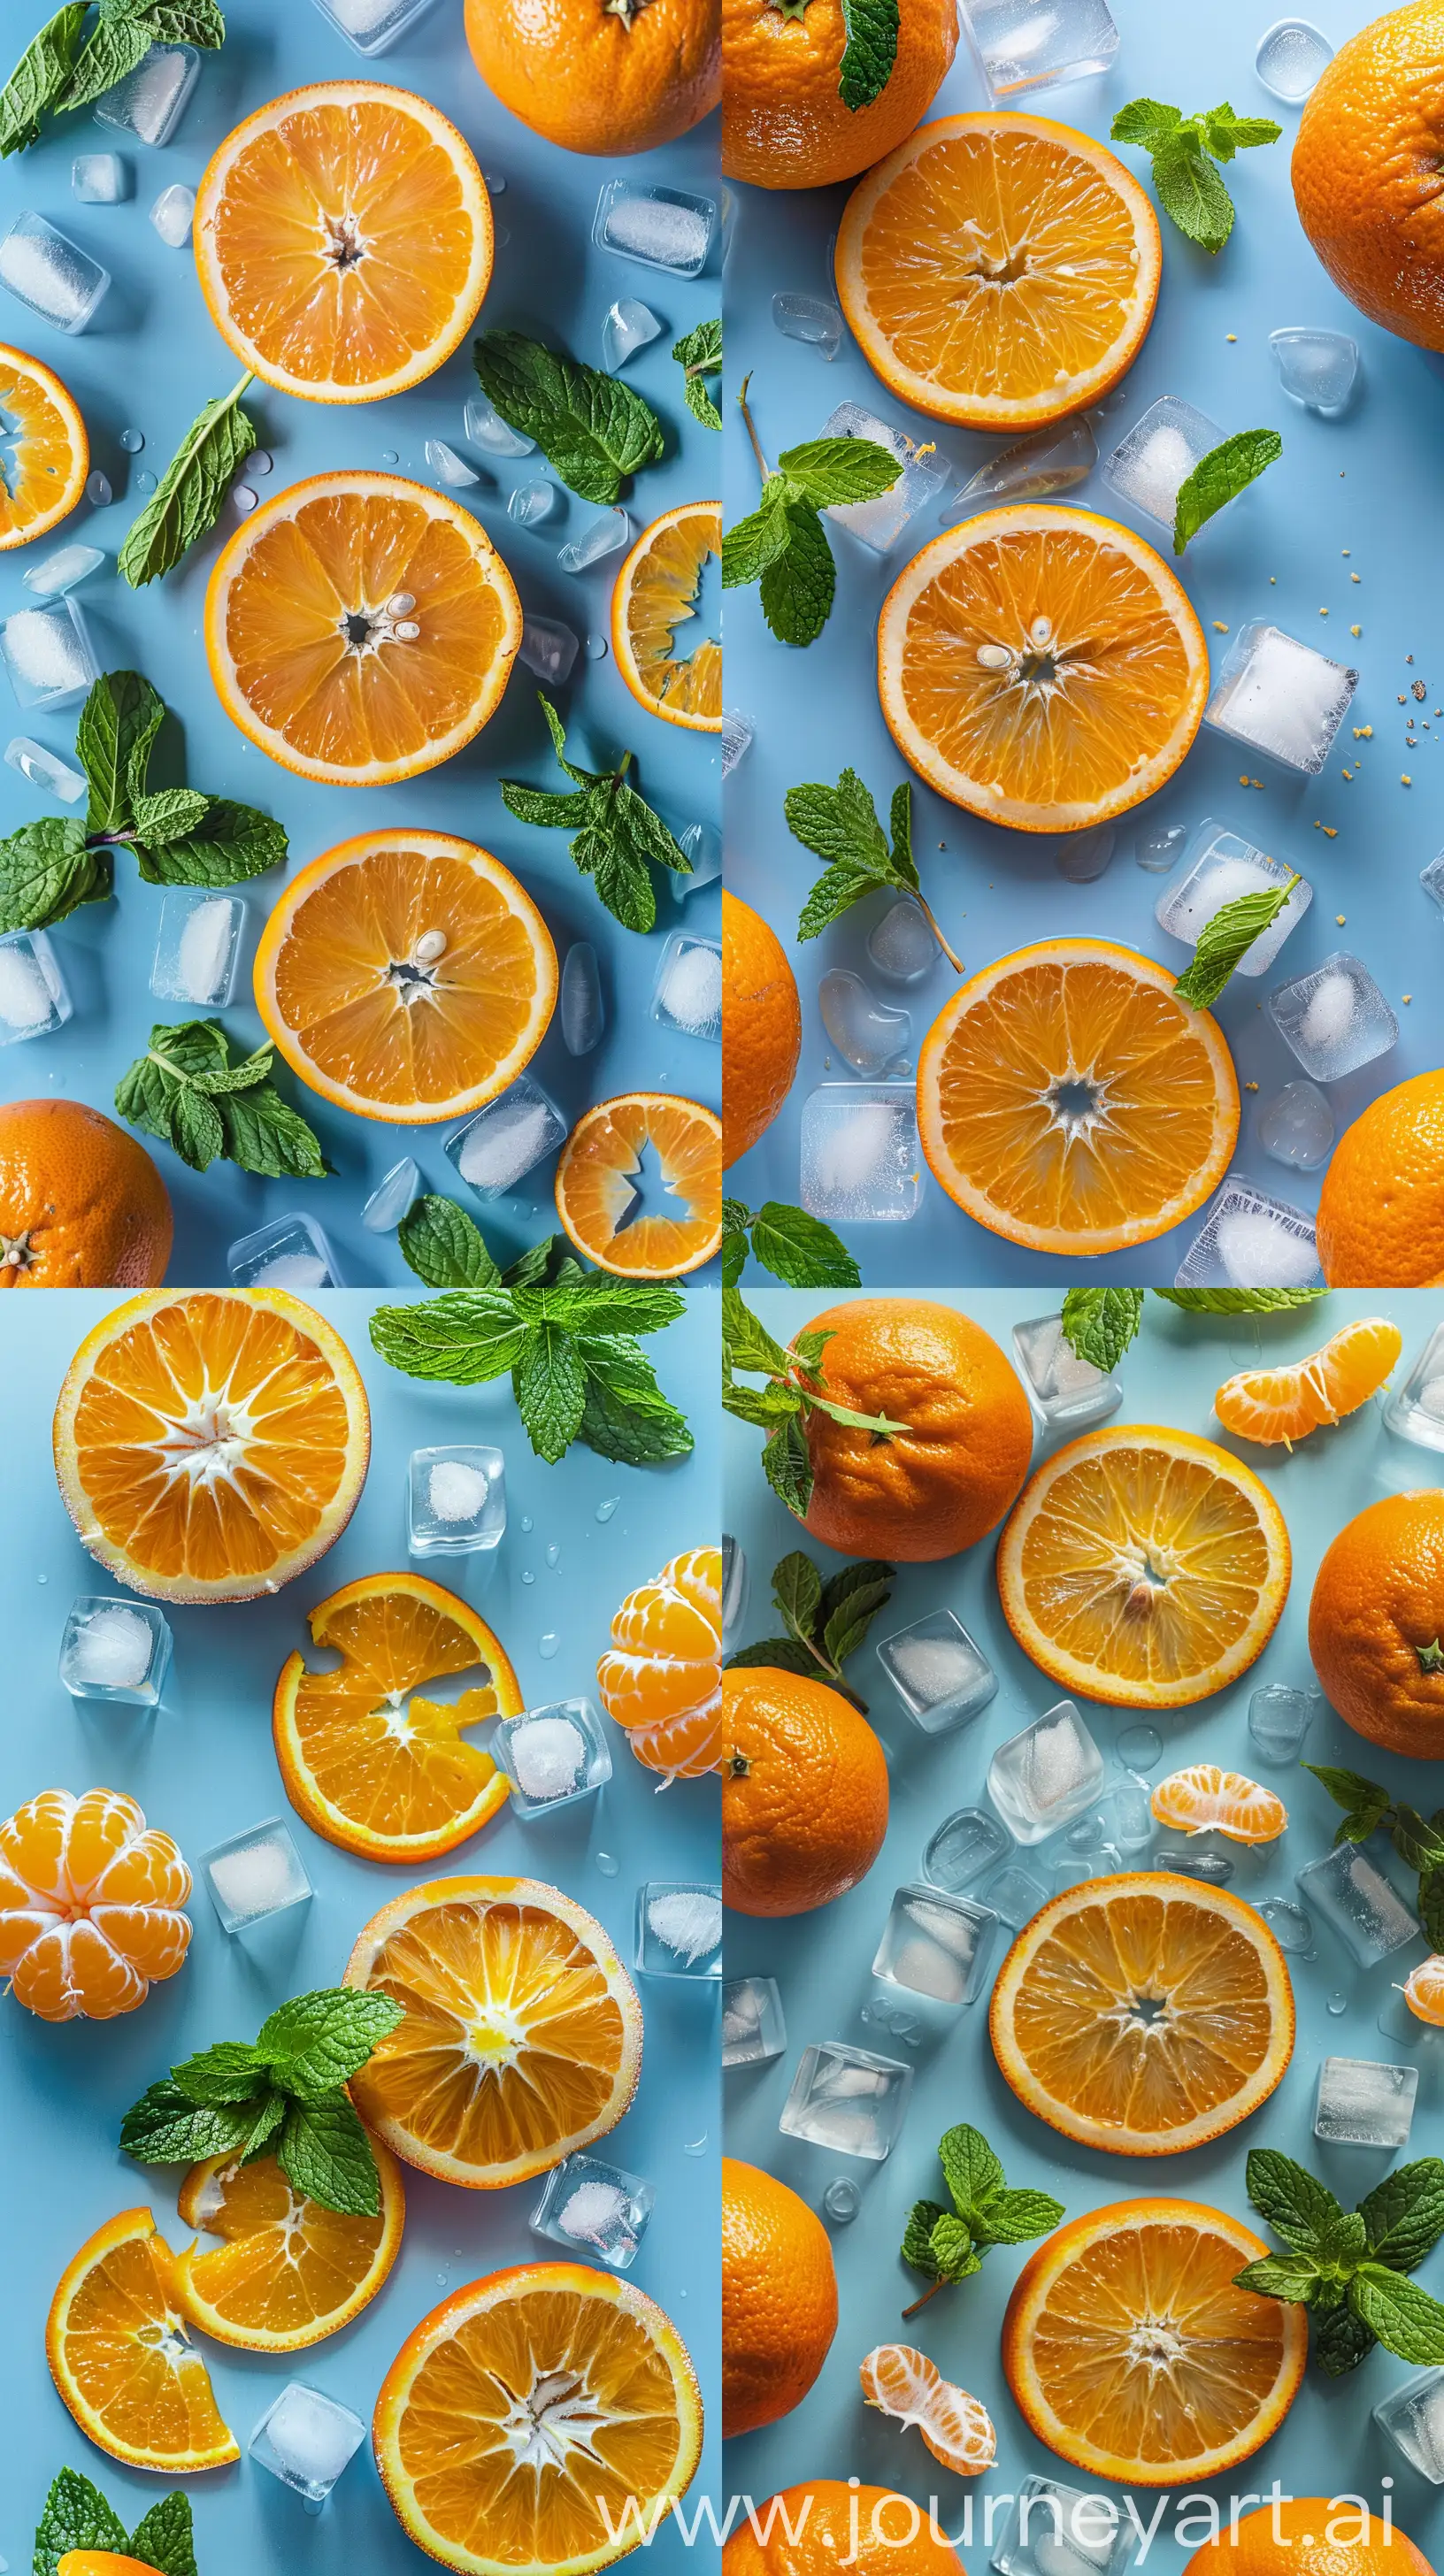 Refreshing-Citrus-Cocktail-Ingredients-on-Vibrant-Blue-Background